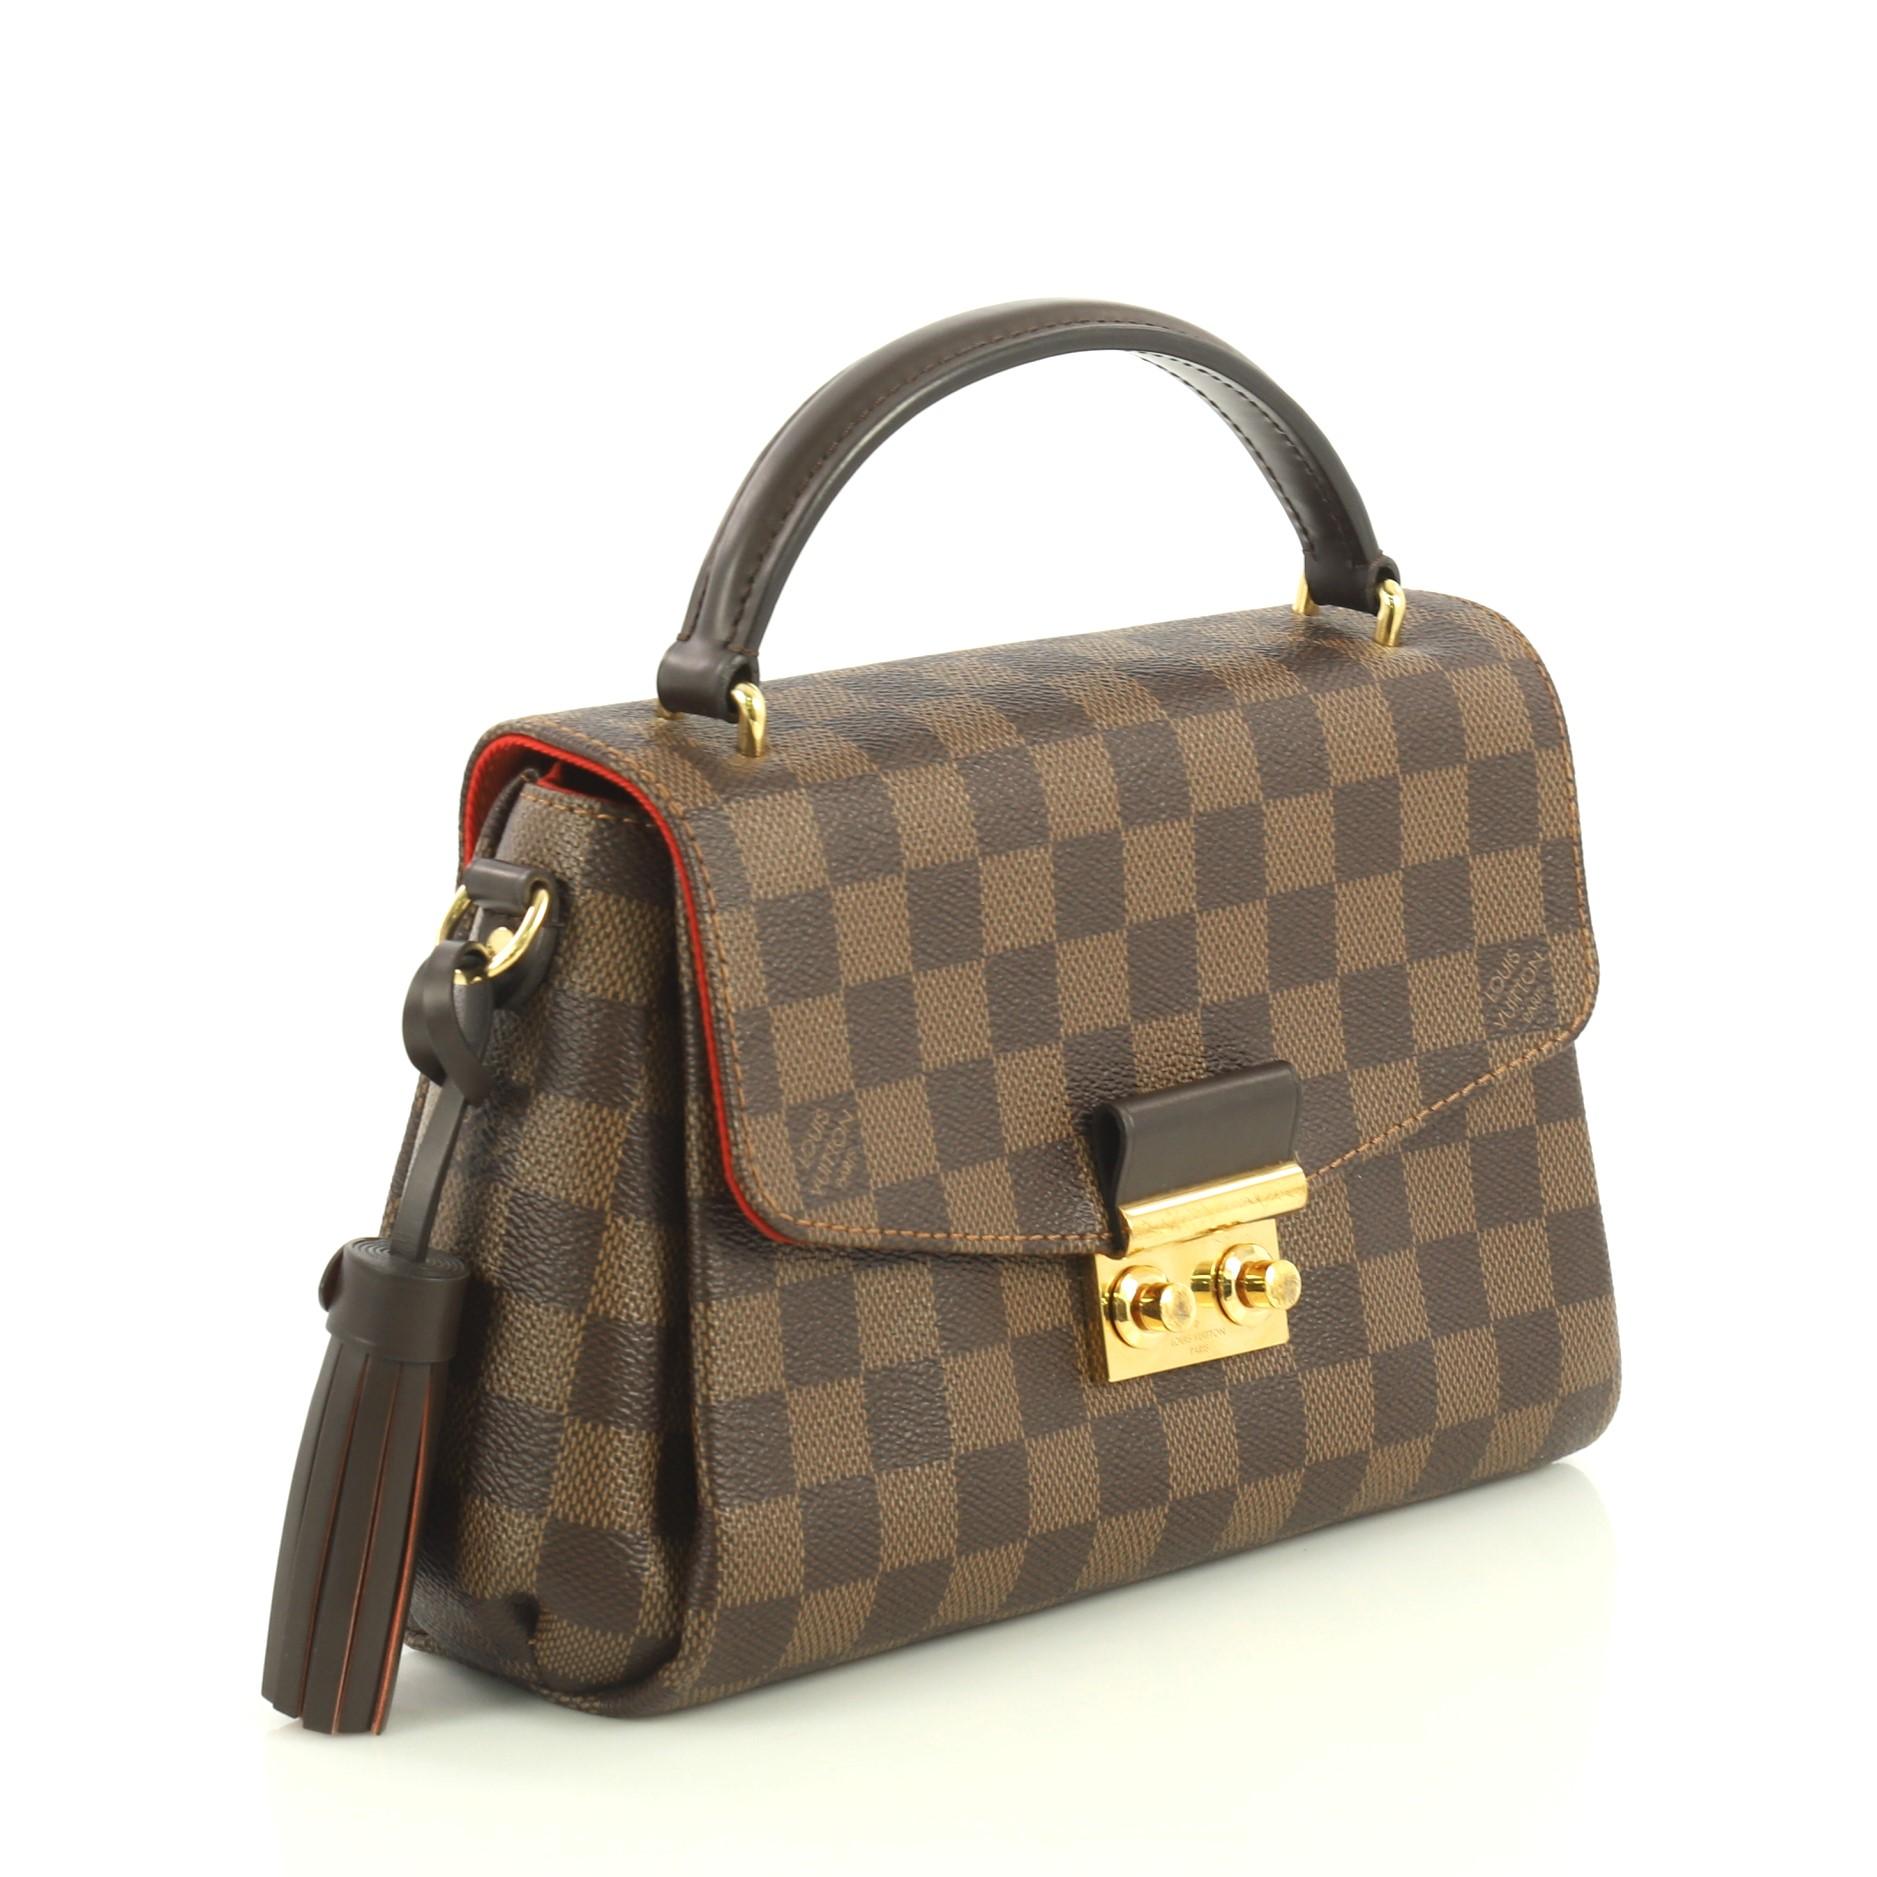 This Louis Vuitton Croisette Handbag Damier, crafted in damier ebene coated canvas, features a leather top handle and gold-tone hardware. It opens to a red fabric interior with slip pocket. Authenticity code reads: FL1128. 

Estimated Retail Price: